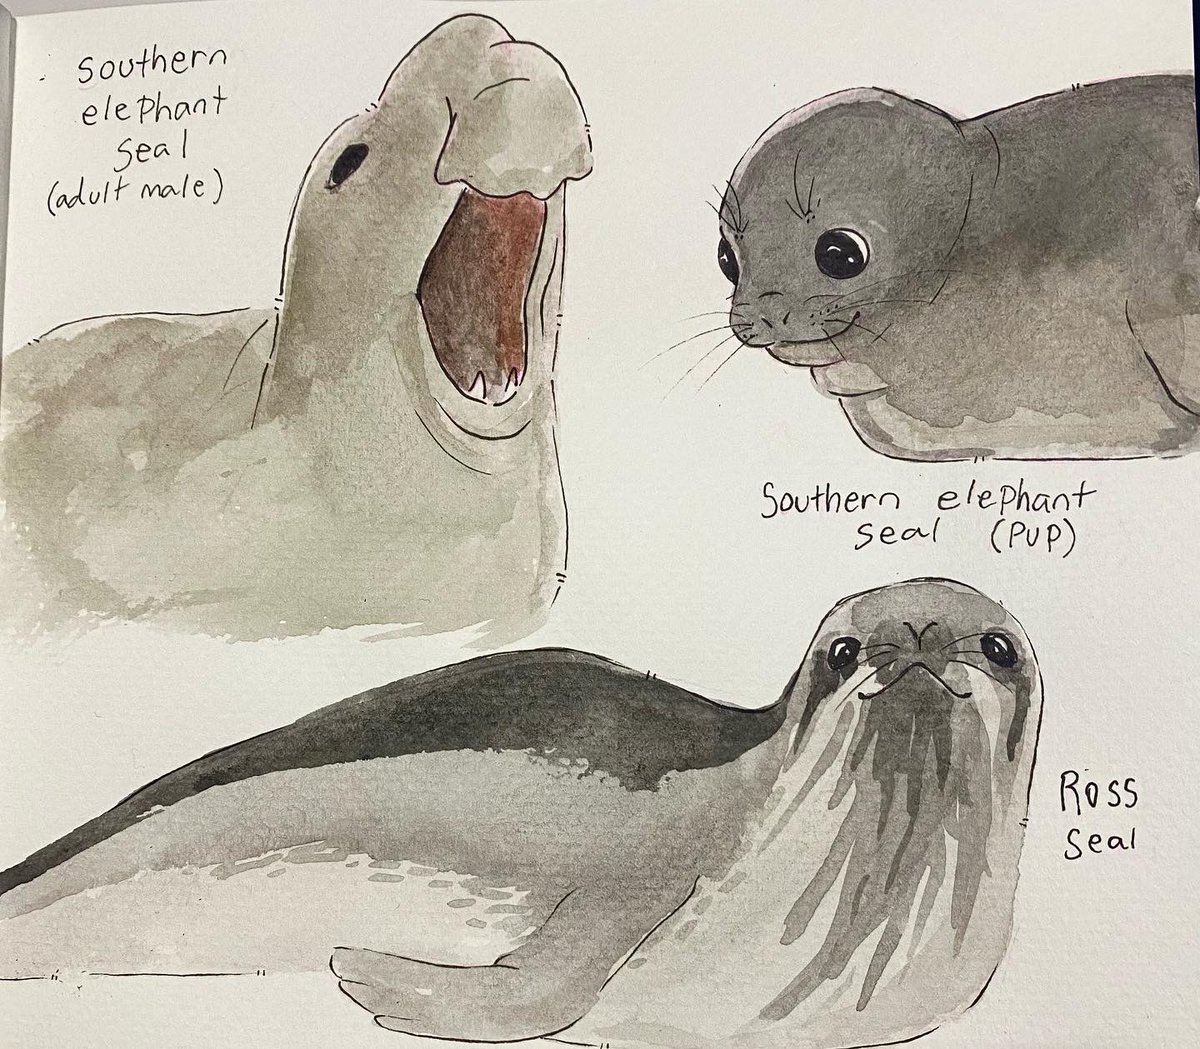 More pages from my pinniped sketchbook #sealtwt